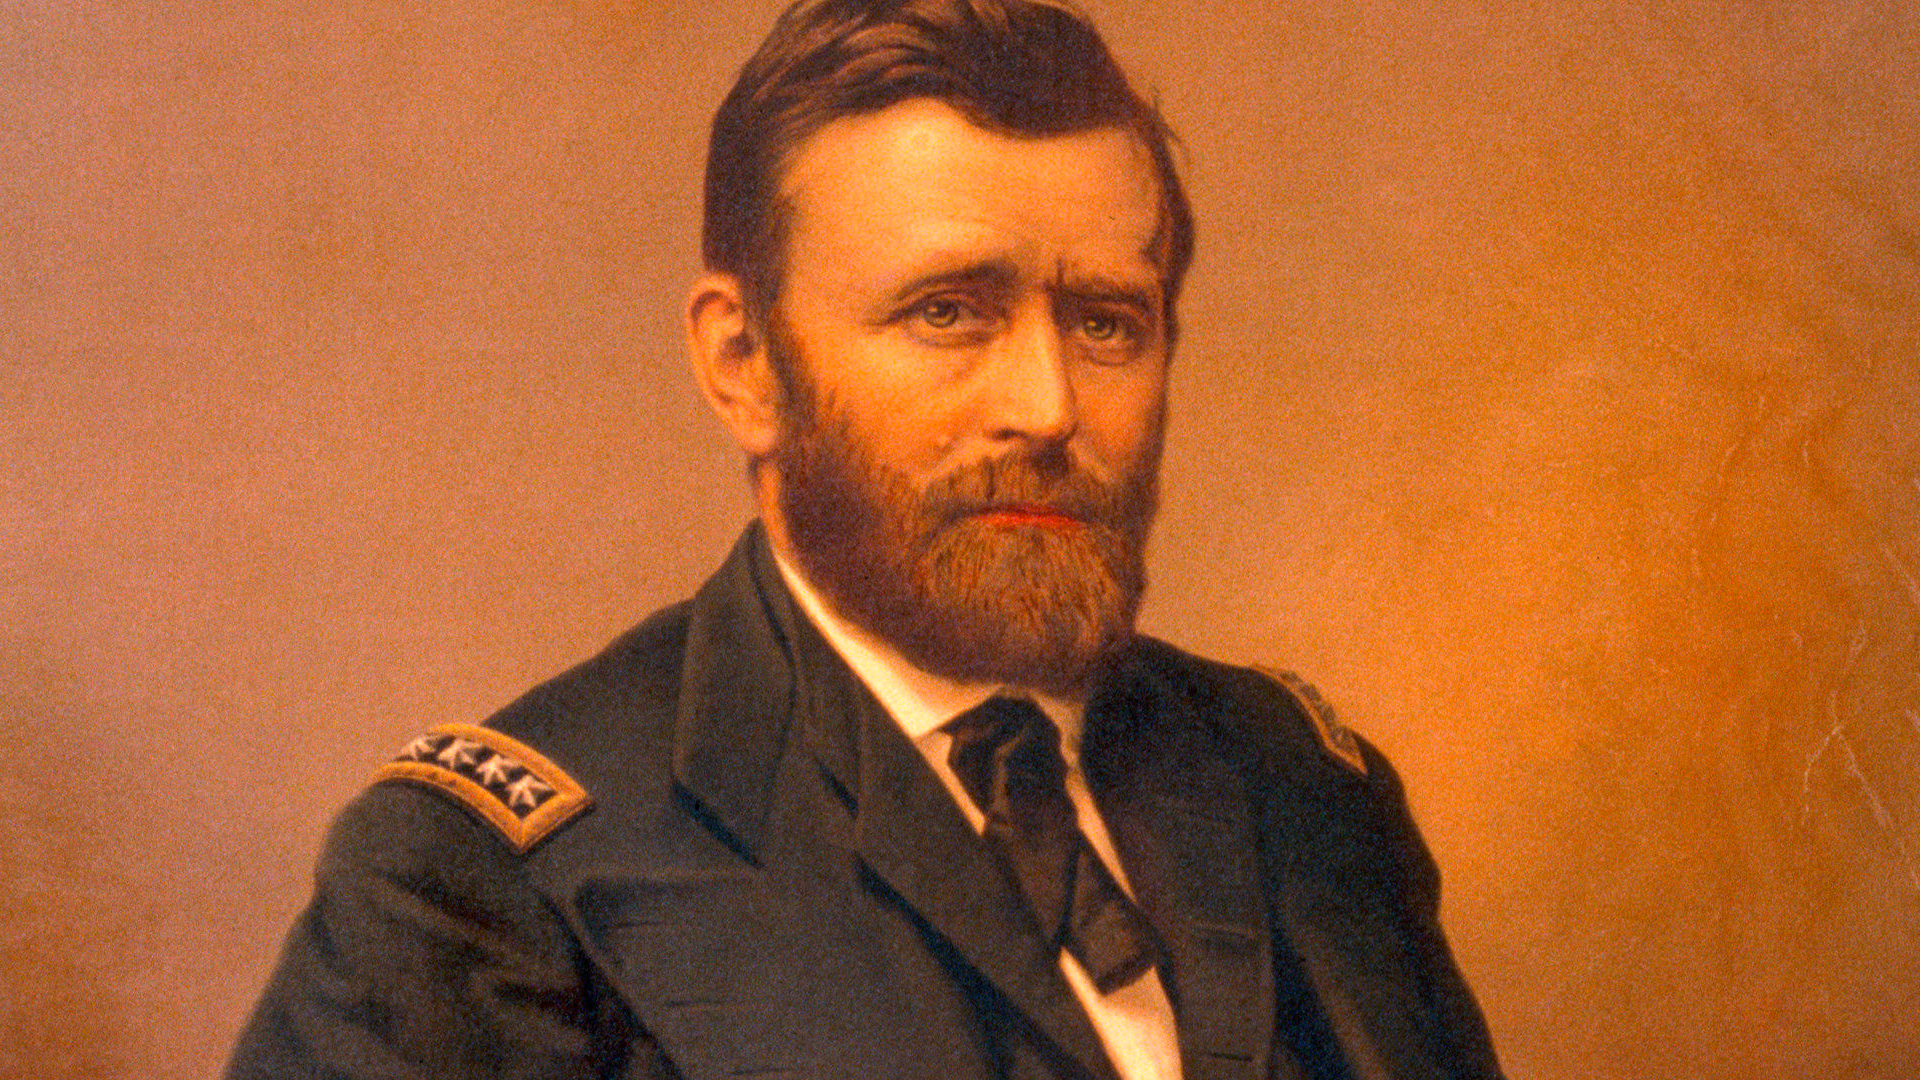 Union General Ulysses S. Grant expels Jews from his military district